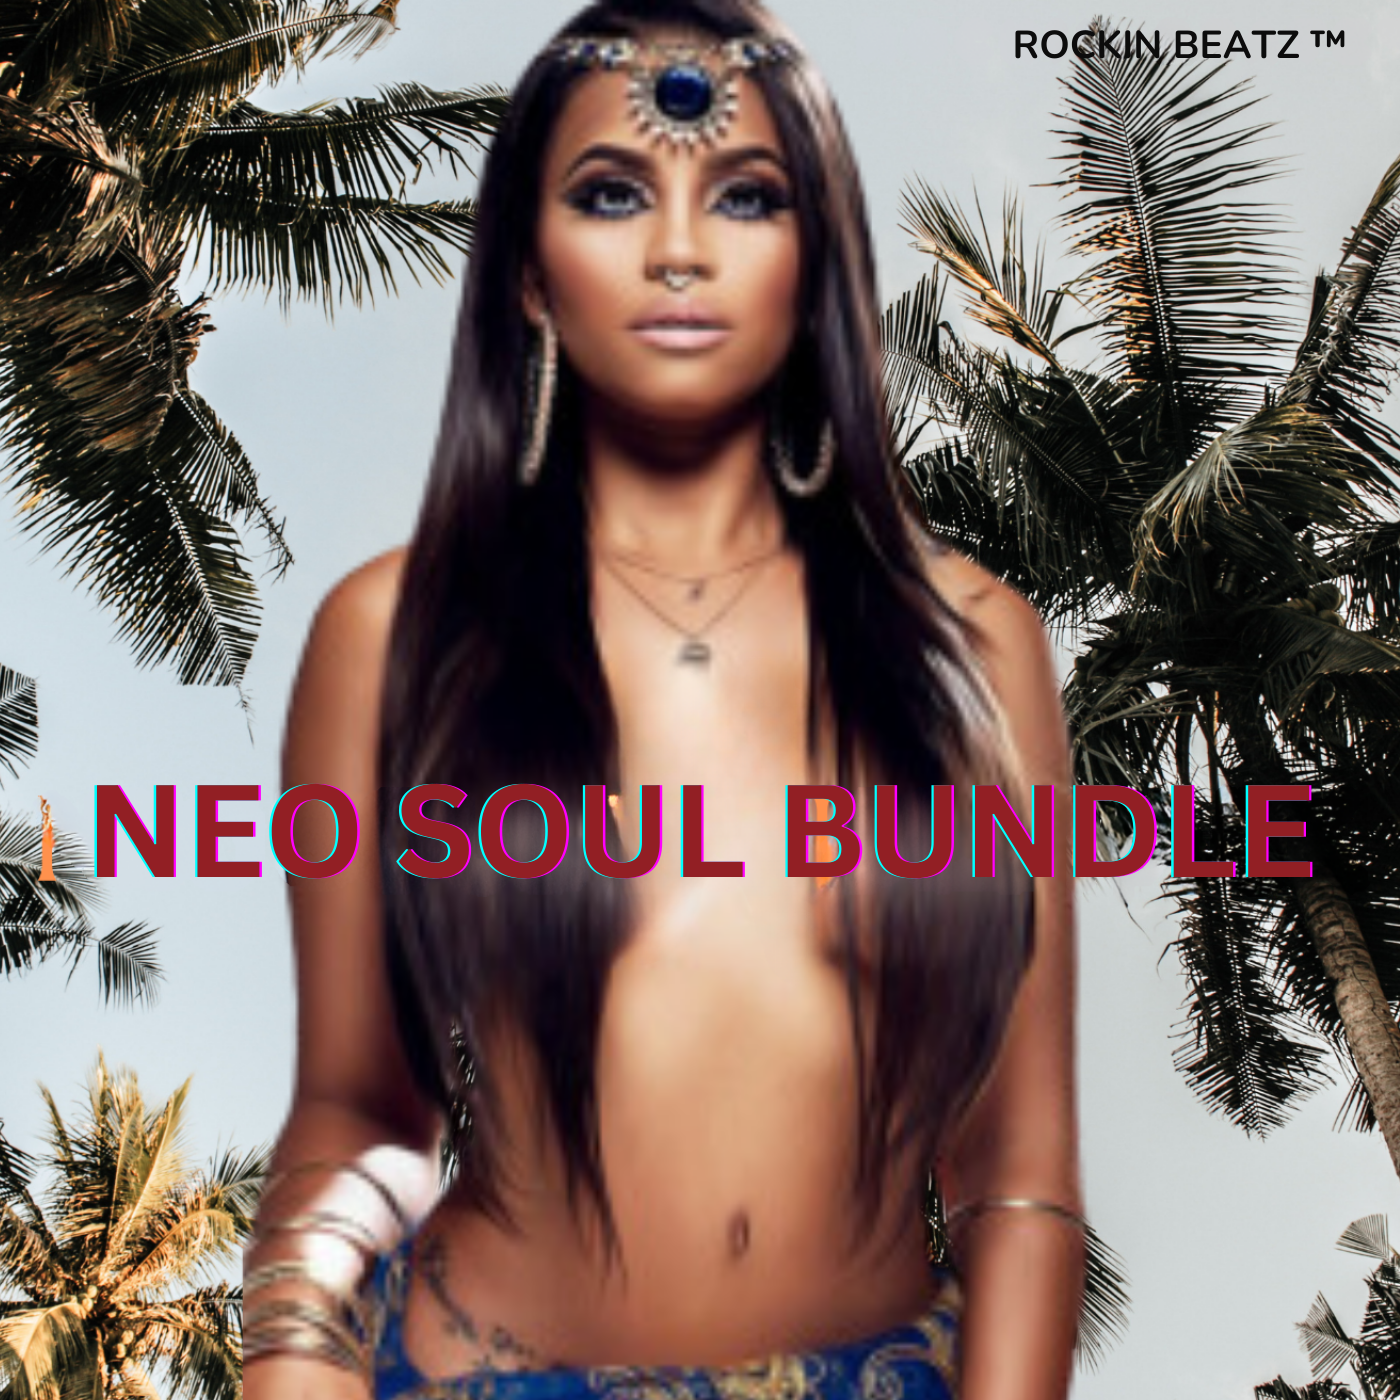 🏆 NEO SOUL BUNDLE 10 👉🏻 ONLY $799.99 🙀 GET YOUR ALBUM BUNDLE & VOCALS MIXED FOR FREE! 🚀 SAVE $100’s 🤑